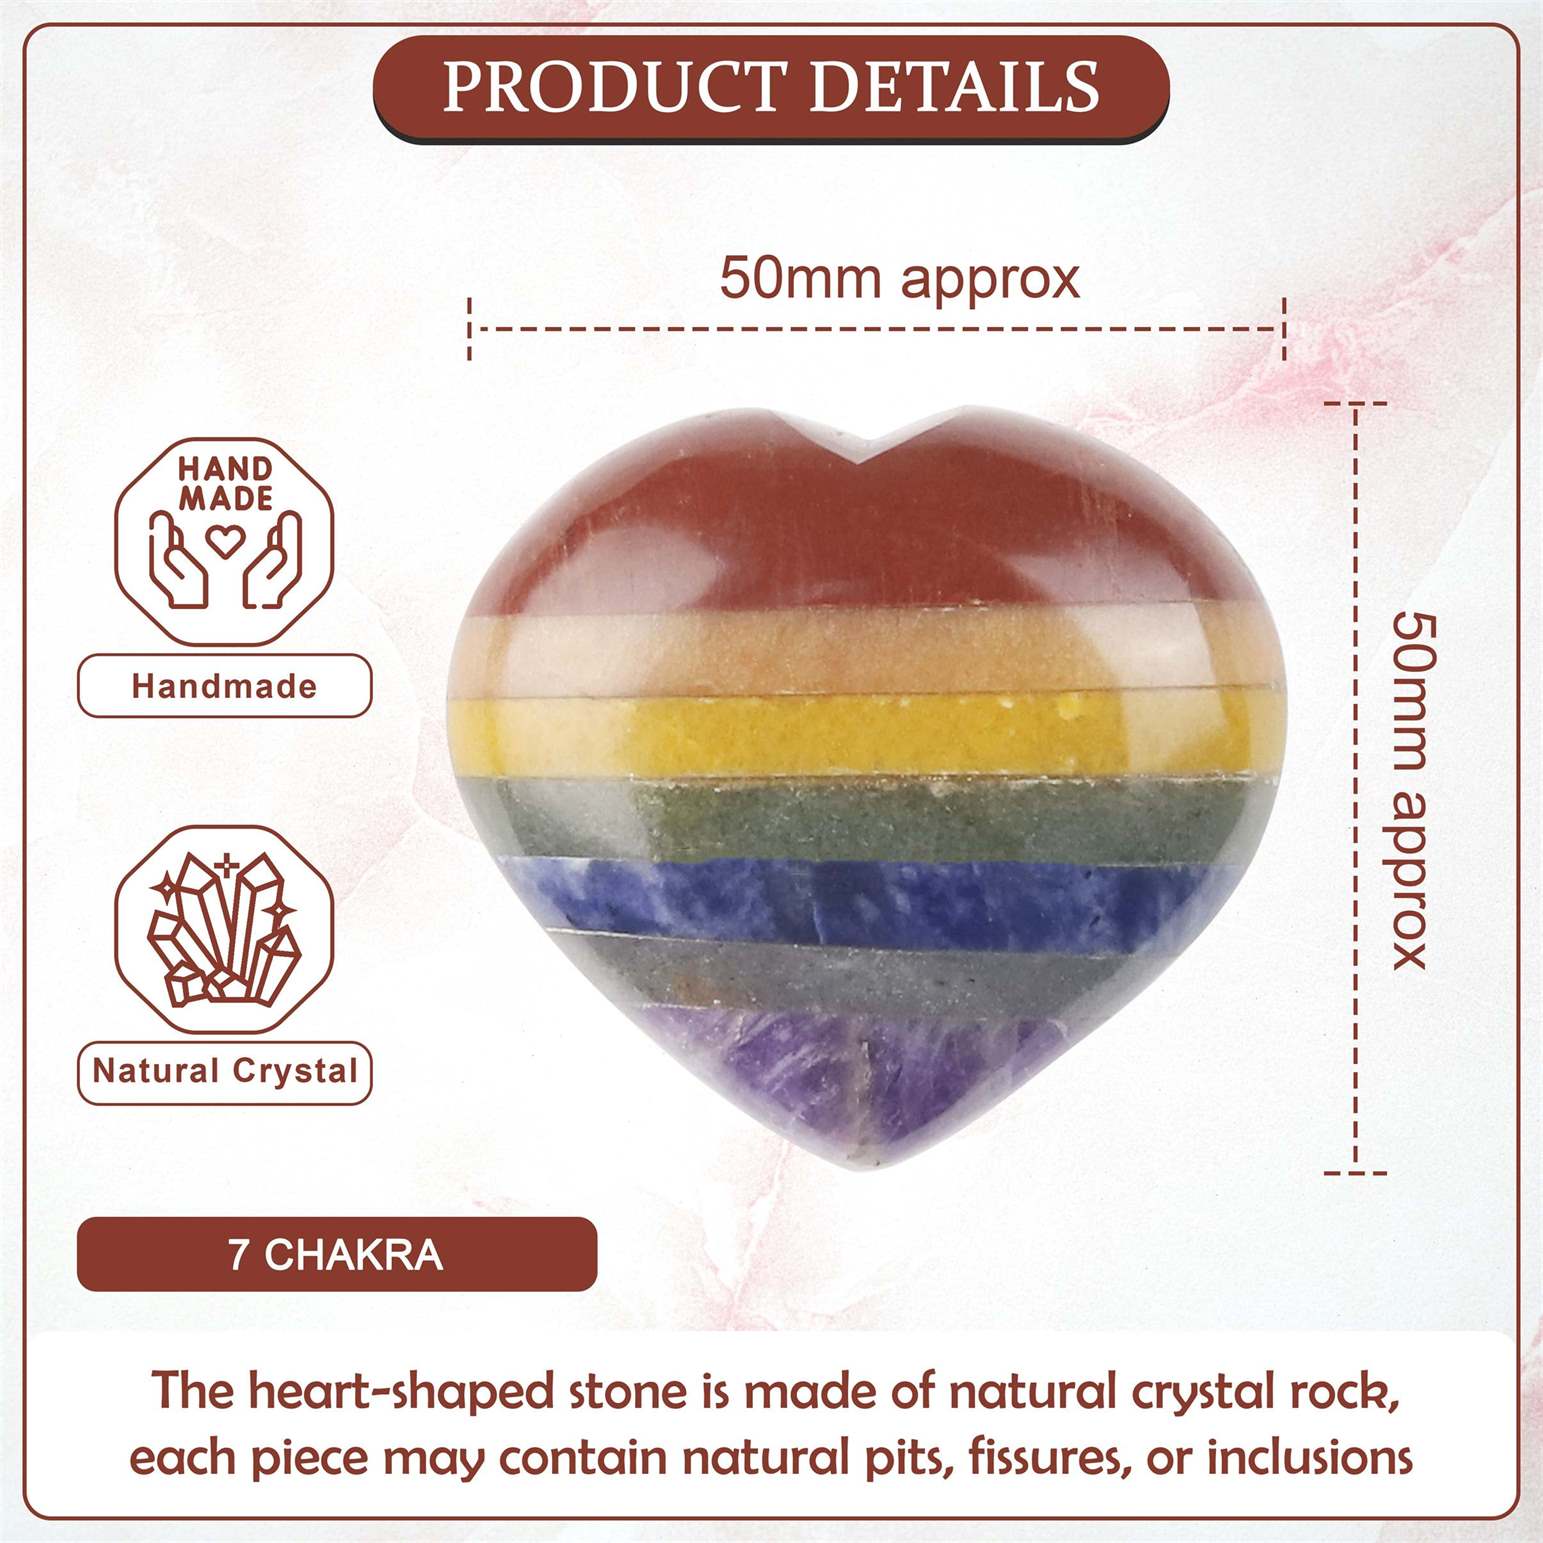 7 Chakra Crystal Heart Shape Stone - Balancing Energy Centers - TheIndianHand